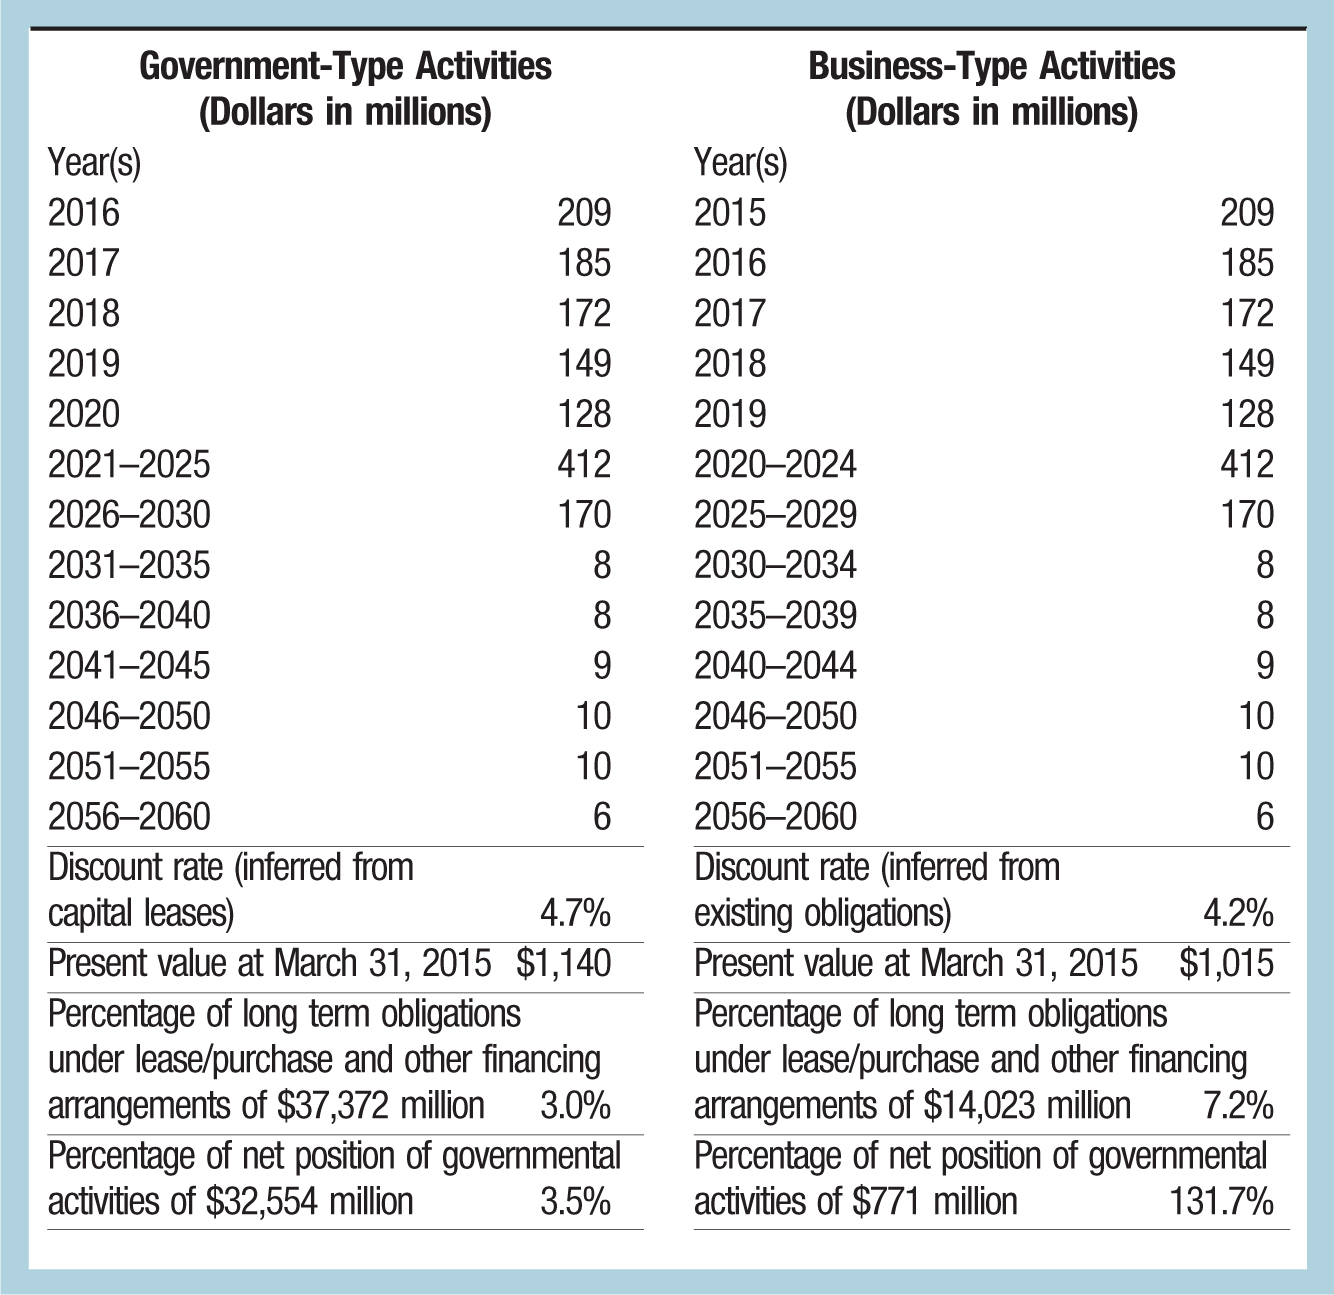 Government-Type Activities (Dollars in millions); Business-Type Activities (Dollars in millions) Year(s); Year(s) 2016; 209; 2015; 209 2017; 185; 2016; 185 2018; 172; 2017; 172 2019; 149; 2018; 149 2020; 128; 2019; 128 2021–2025; 412; 2020–2024; 412 2026–2030; 170; 2025–2029; 170 2031–2035; 8; 2030–2034; 8 2036–2040; 8; 2035–2039; 8 2041–2045; 9; 2040–2044; 9 2046–2050; 10; 2046–2050; 10 2051–2055; 10; 2051–2055; 10 2056–2060; 6; 2056–2060; 6 Discount rate (inferred from capital leases); 4.7%; Discount rate (inferred from existing obligations); 4.2% Present value at March 31, 2015 $1,140; Present value at March 31, 2015; $1,015 Percentage of long term obligations under lease/purchase and other financing arrangements of $37,372 million 3.0%; Percentage of long term obligations under lease/purchase and other financing arrangements of $14,023 million 7.2% Percentage of net position of governmental activities of $32,554 million 3.5%; Percentage of net position of governmental activities of $771 million 131.7%